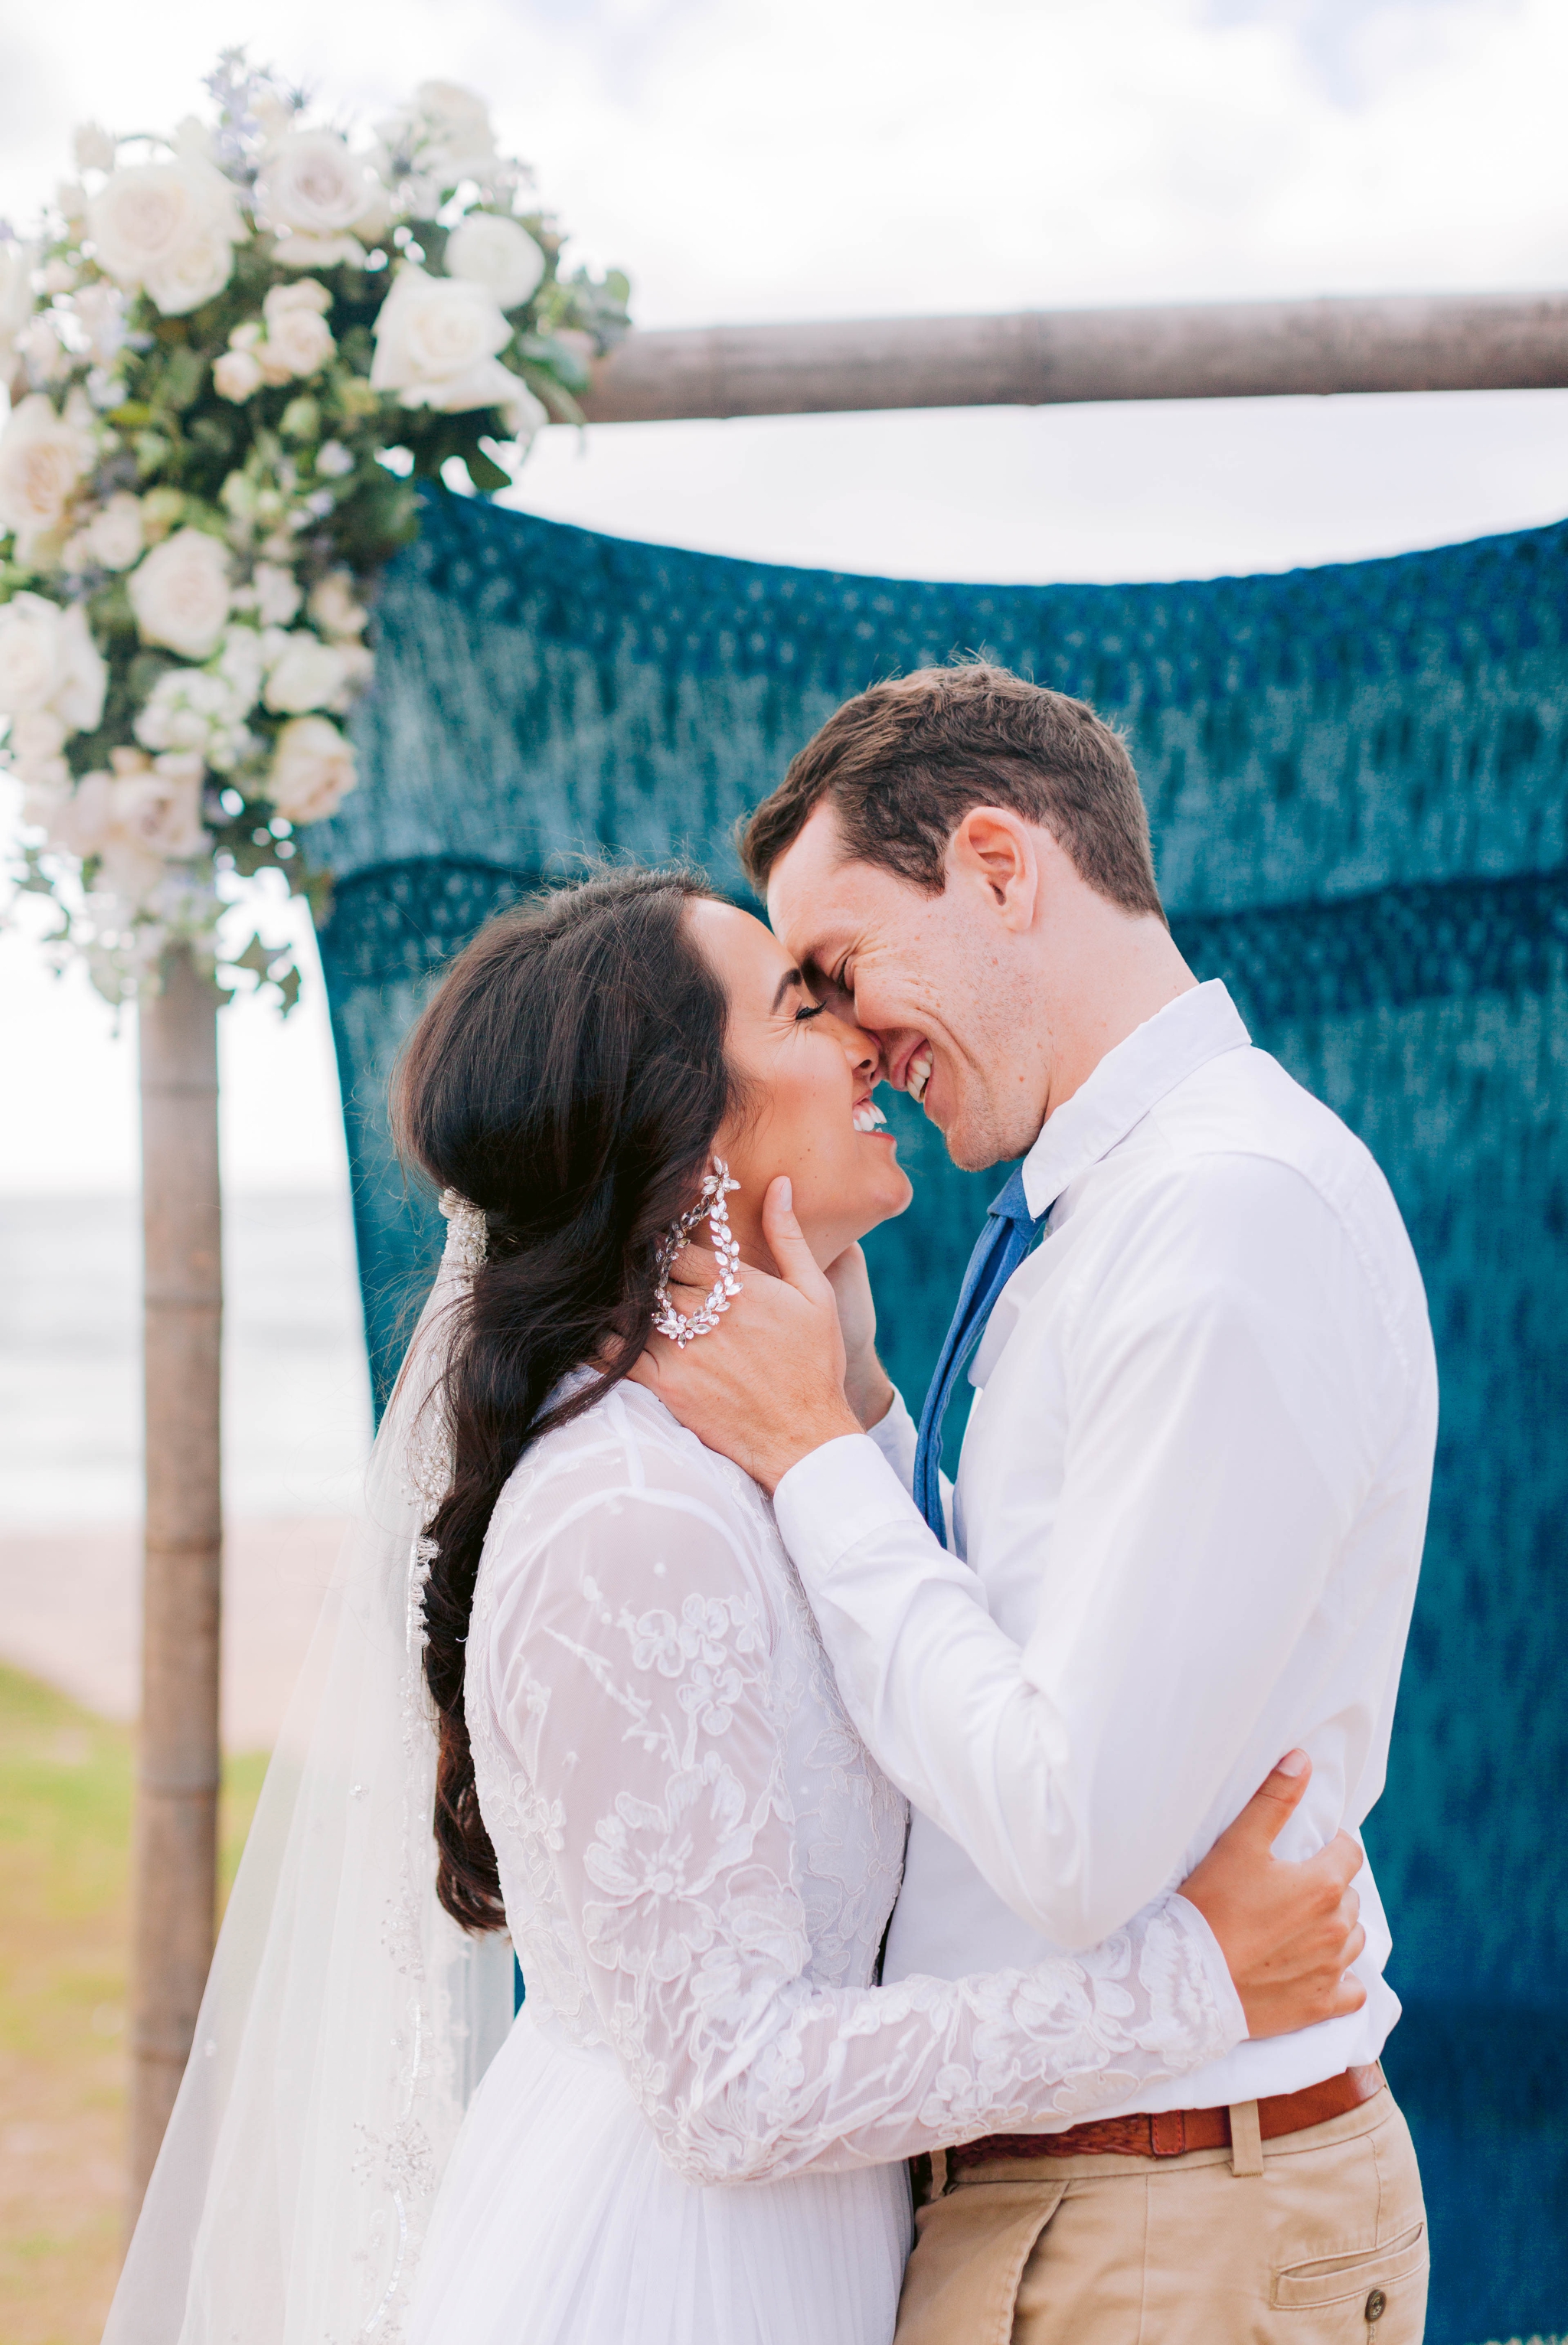 Bride + Groom kissing in front of a ceremony arch decorated with fabric and flowers - Ana + Elijah - Wedding at Loulu Palm in Haleiwa, HI - Oahu Hawaii Wedding Photographer 